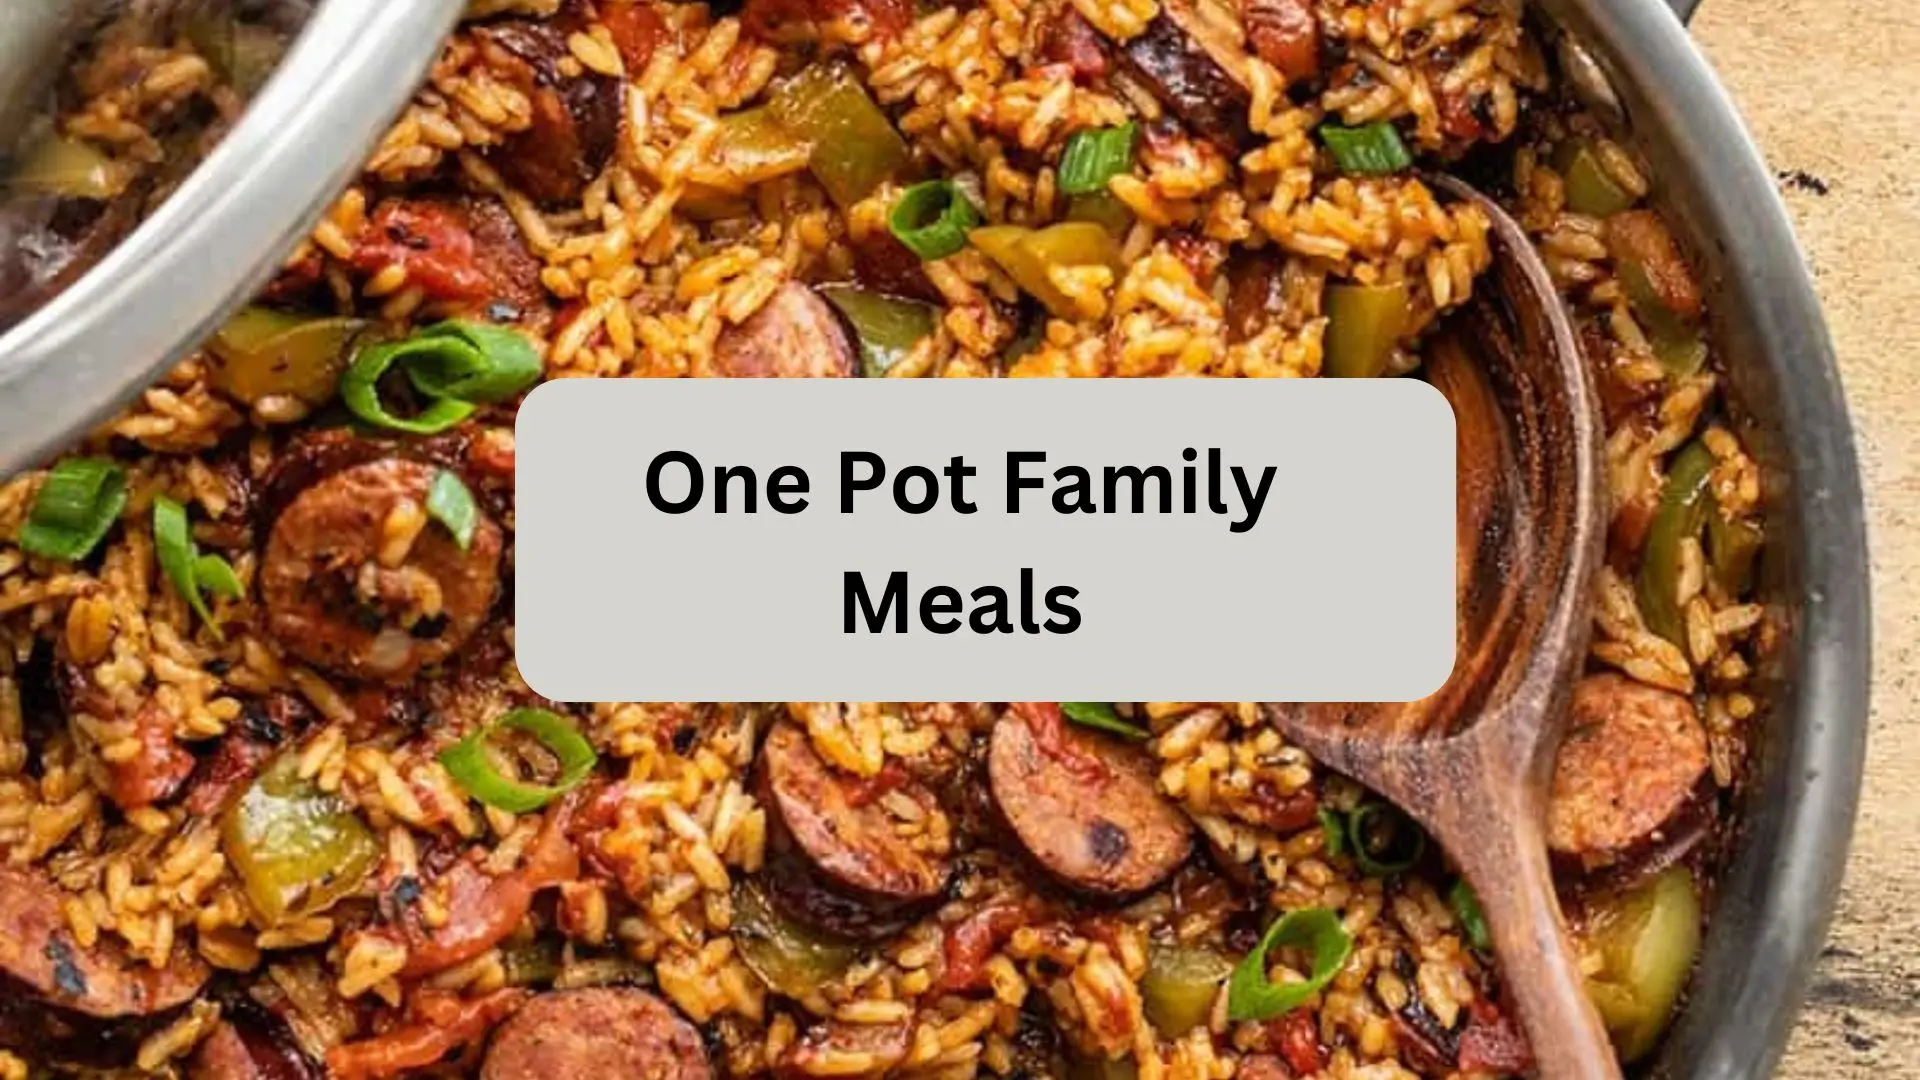 One Pot Family Meals